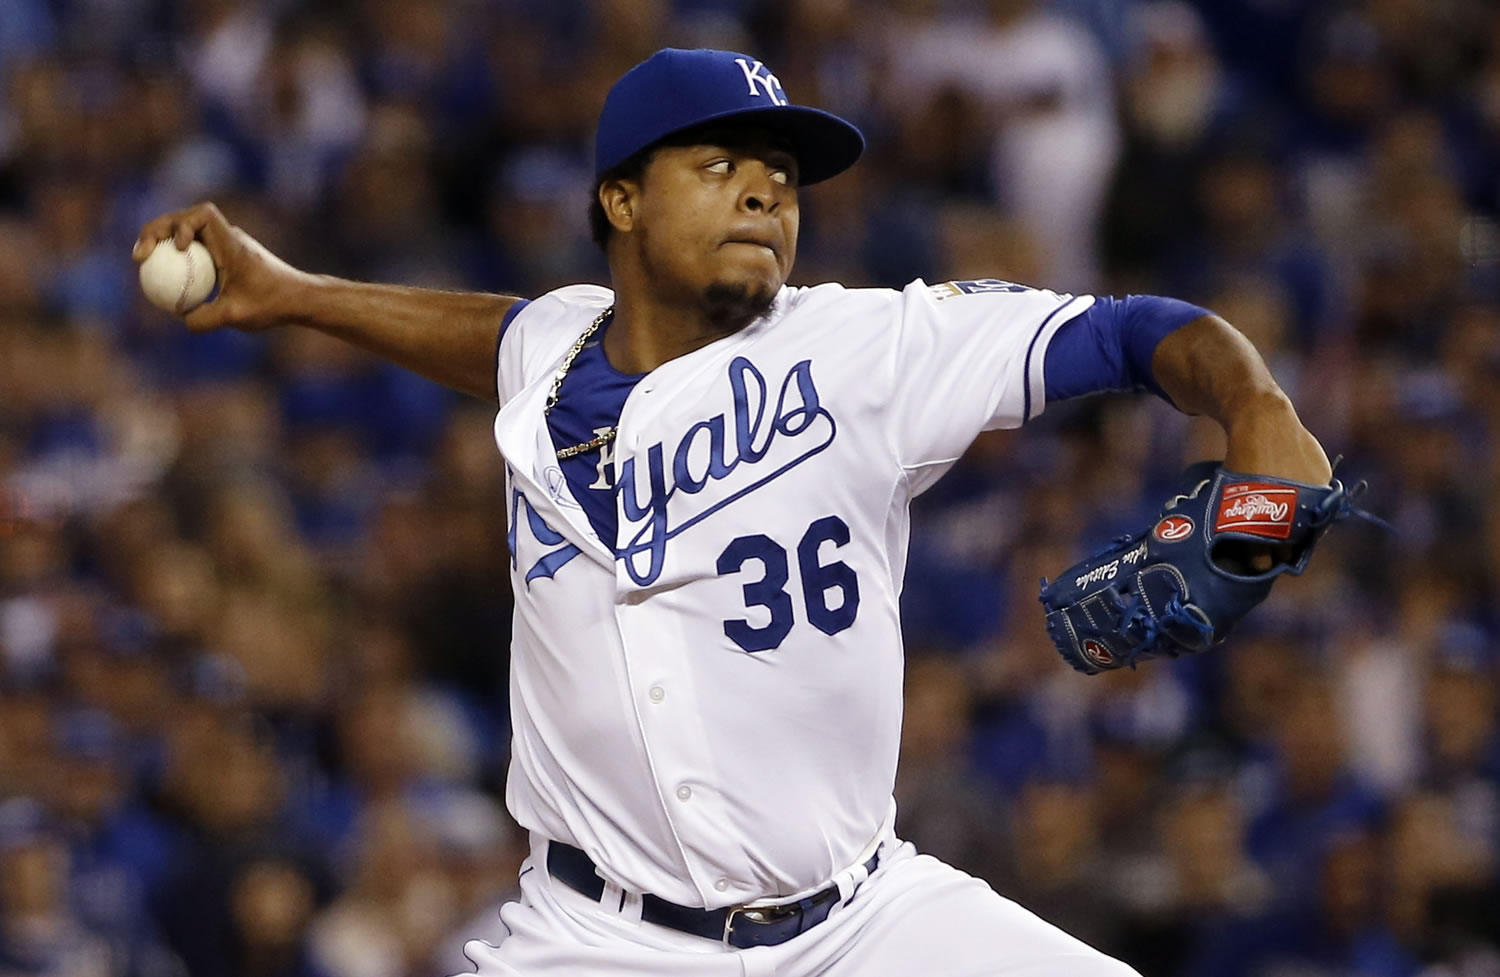 Kansas City Royals starting pitcher Edinson Volquez throws against the Toronto Blue Jays during the first inning in Game 1 of baseball's American League Championship Series, Friday, Oct. 16, 2015, in Kansas City, Mo.